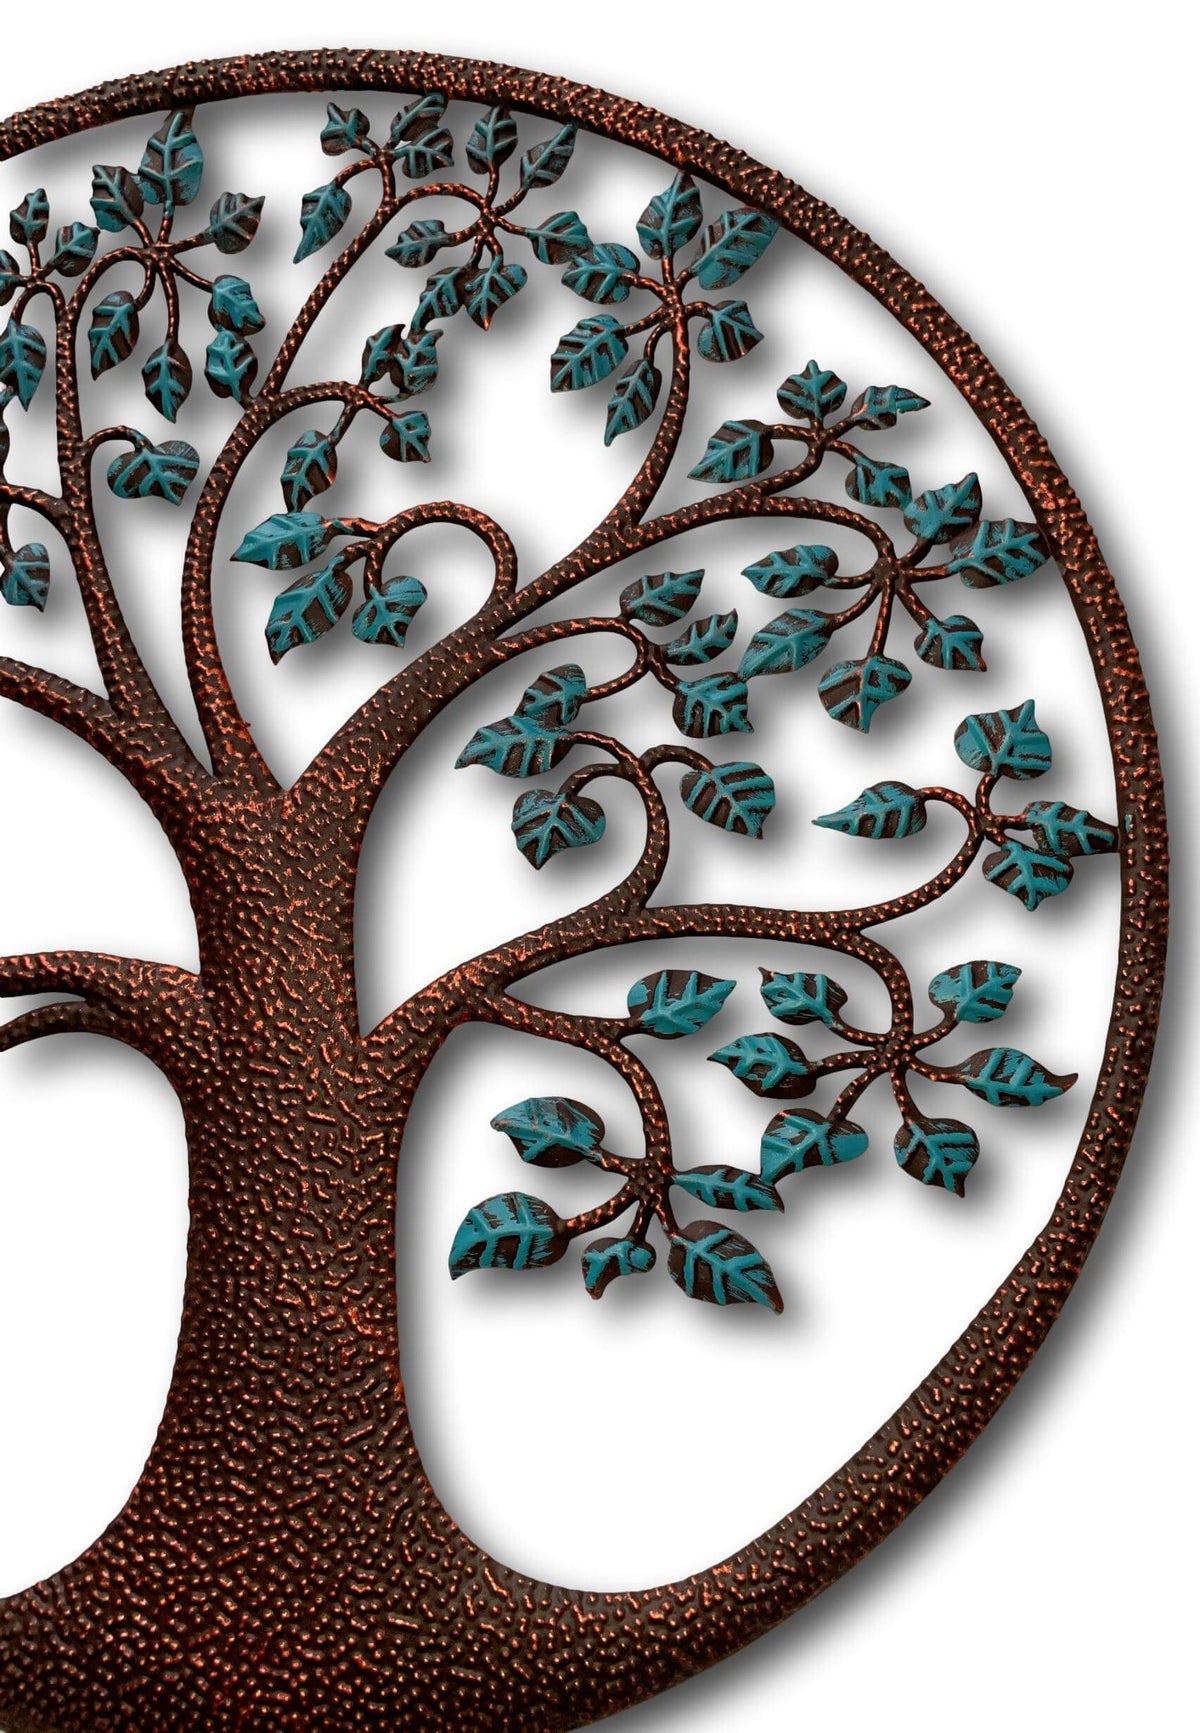 TREE OF LIFE METAL WALL ART - HANGING PLAQUE + SINGING BOWLS AND MEDITATION